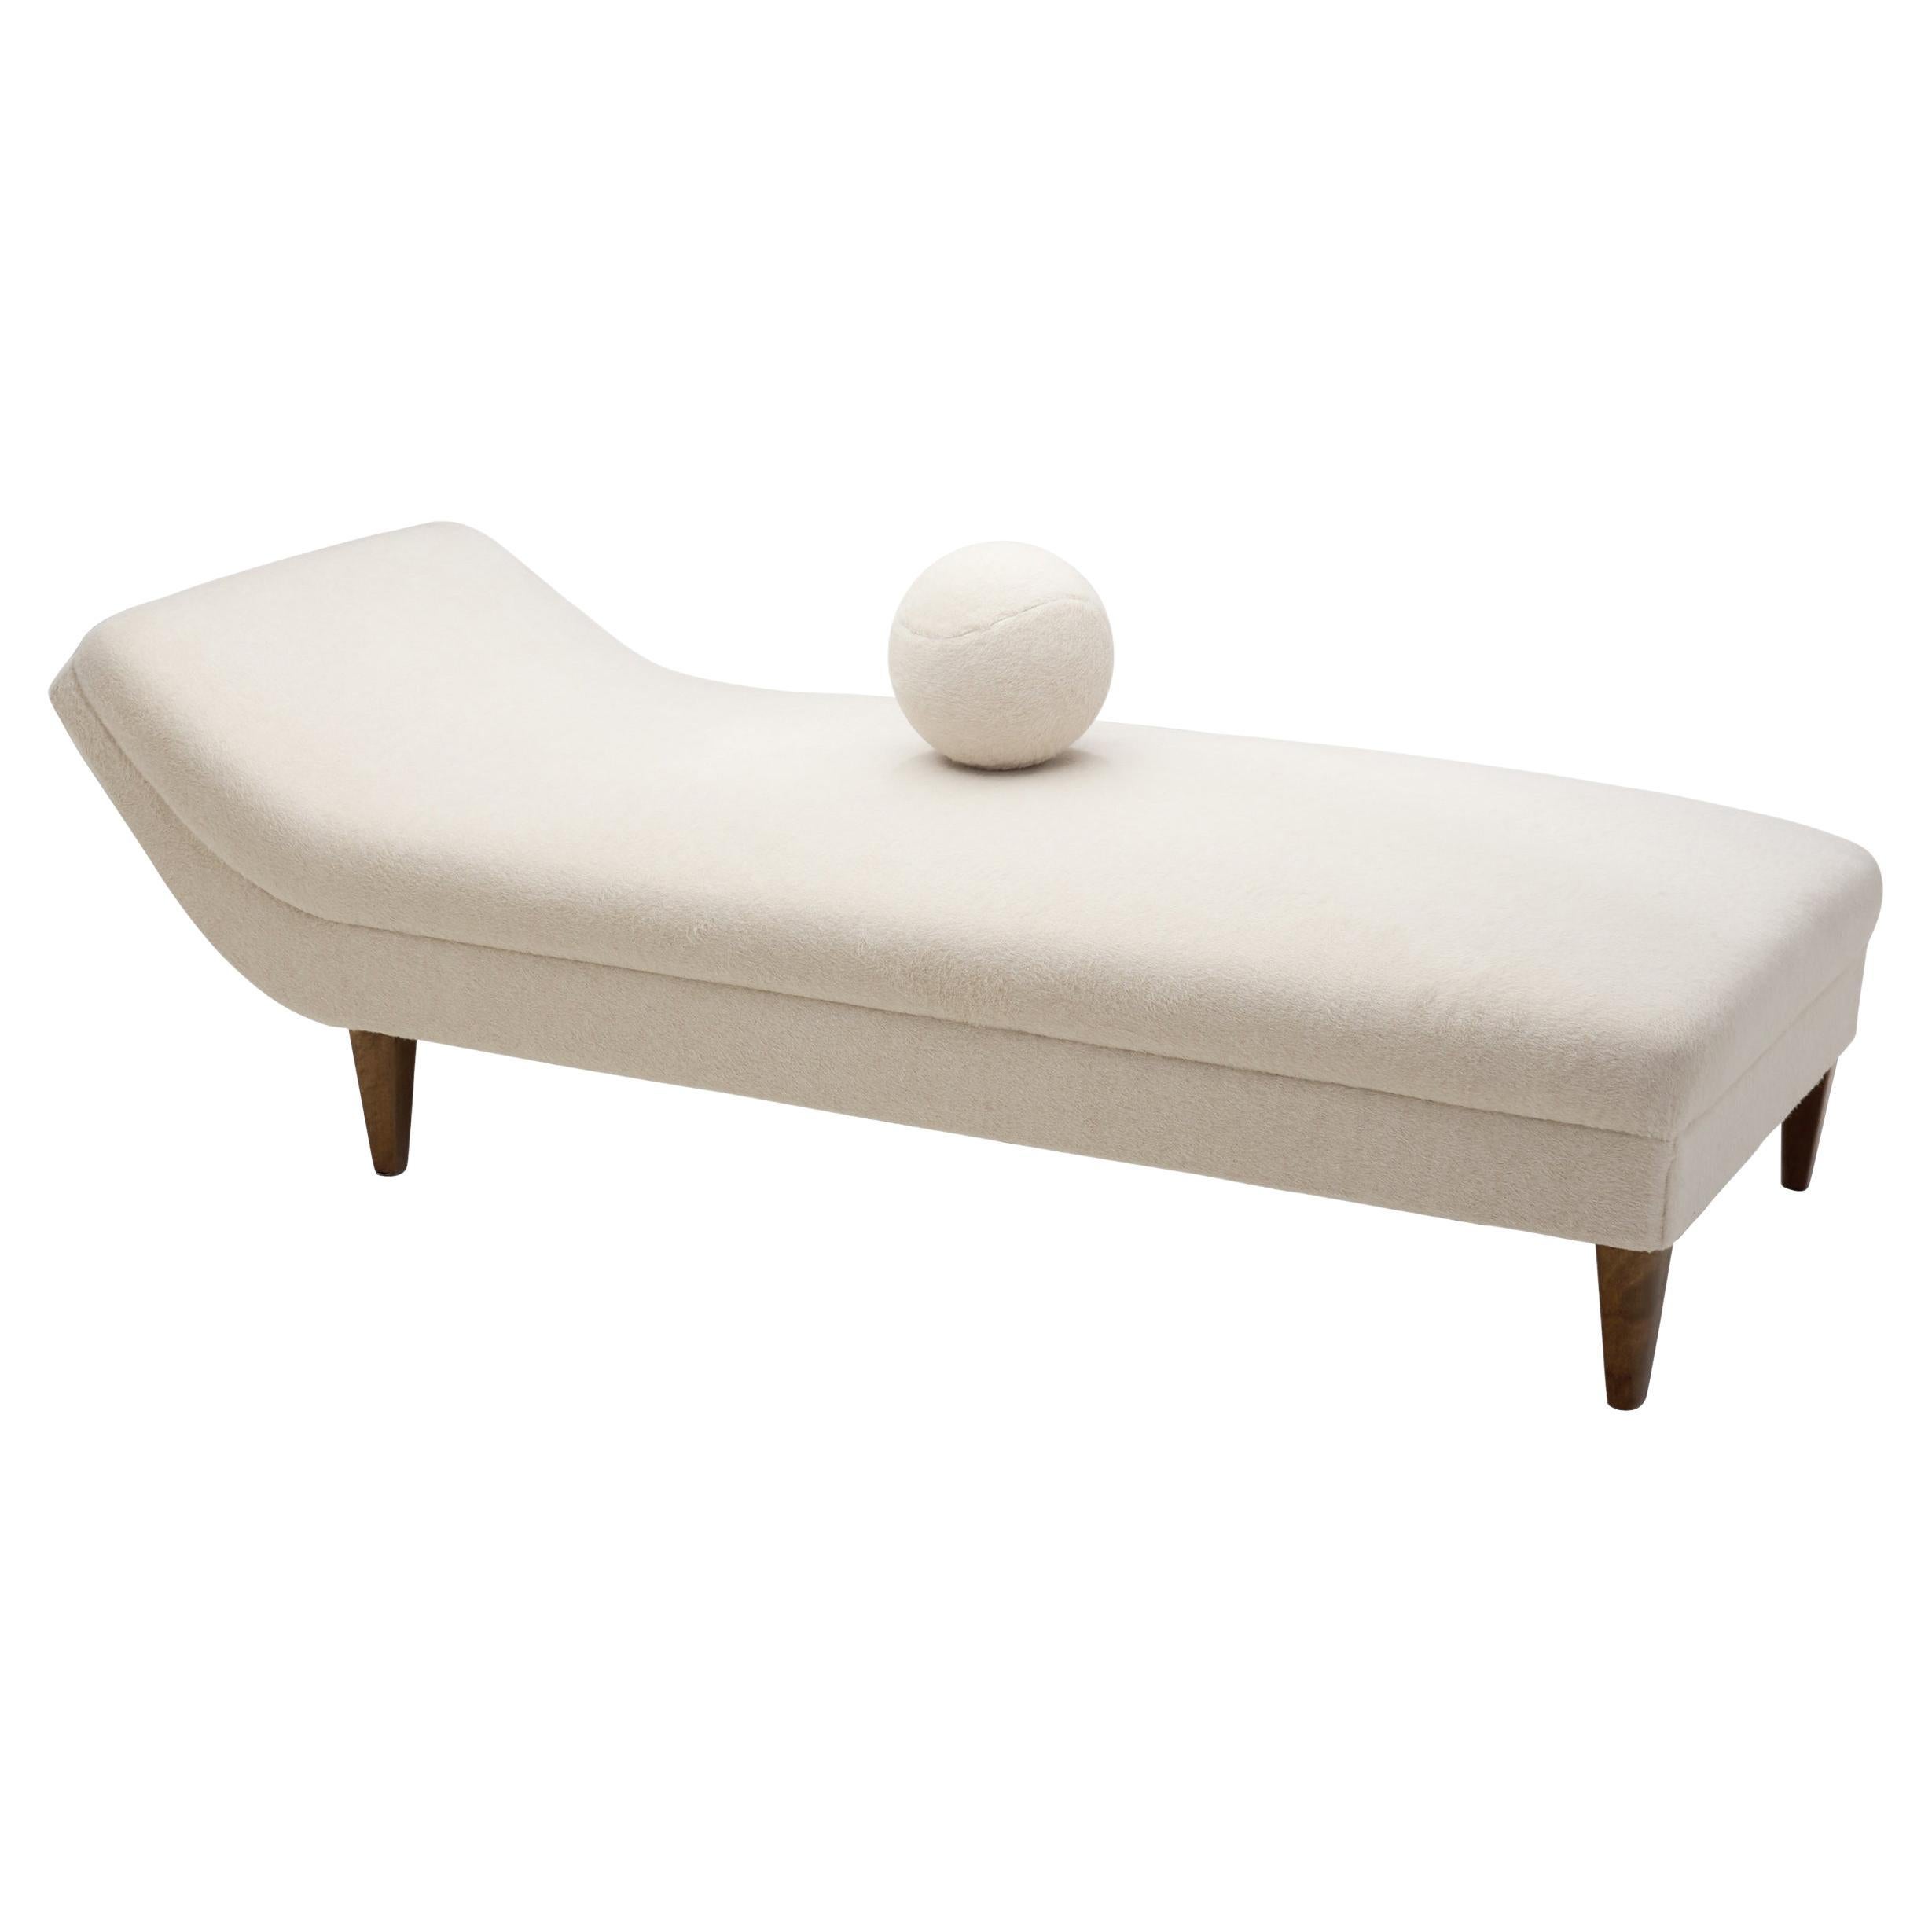 Upholstered Swedish Modern Daybed with Matching Accent Pillow, Sweden ca 1940s